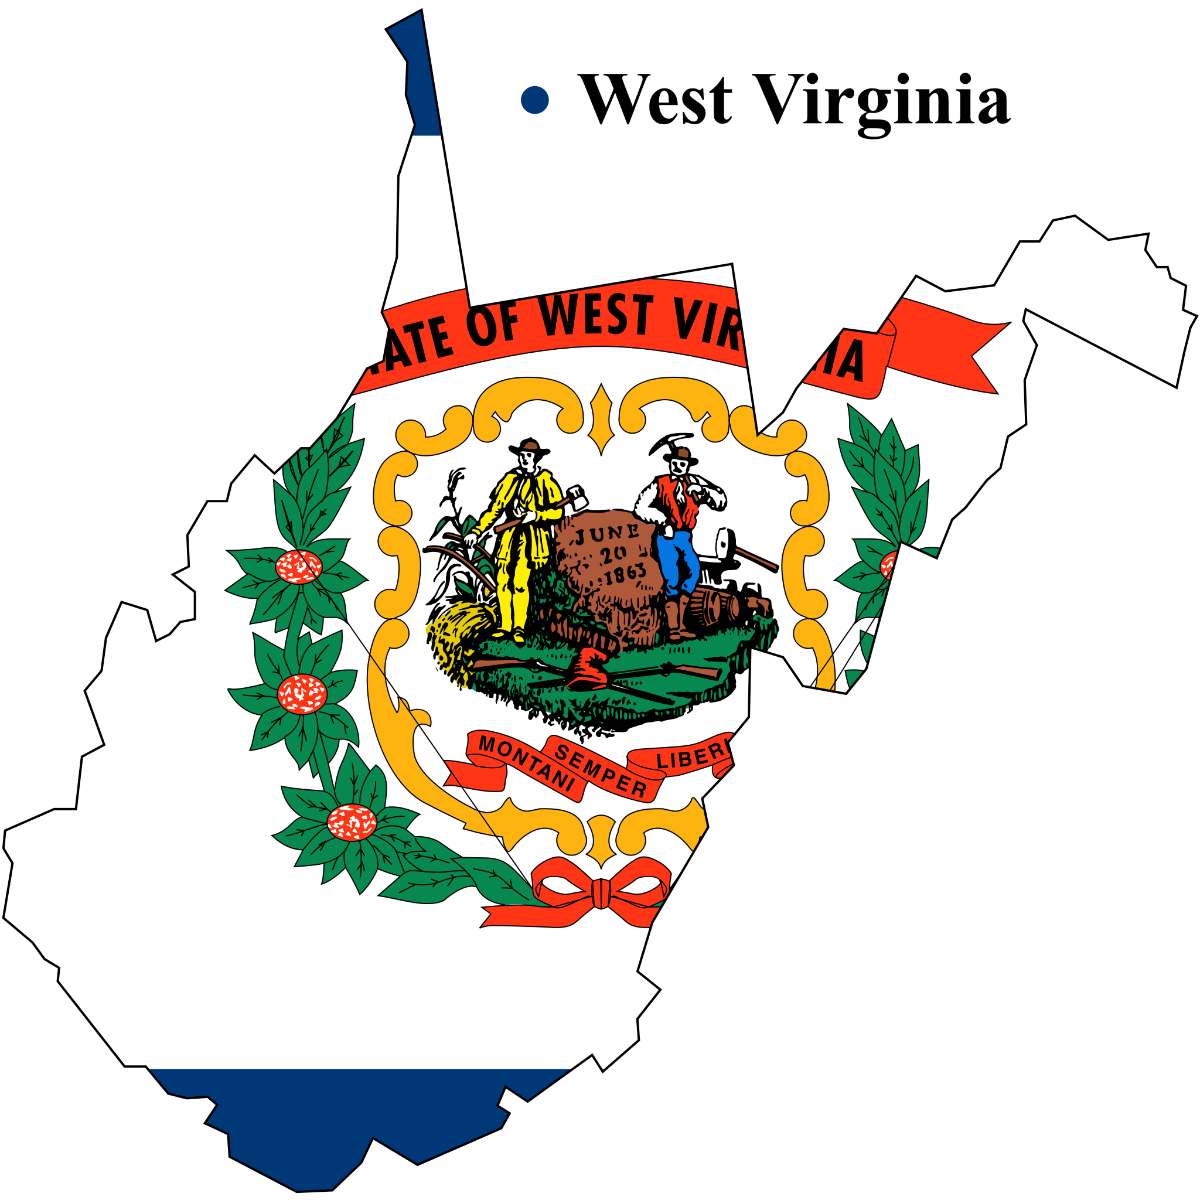 West Virginia State map cutout with West Virginia flag superimposed